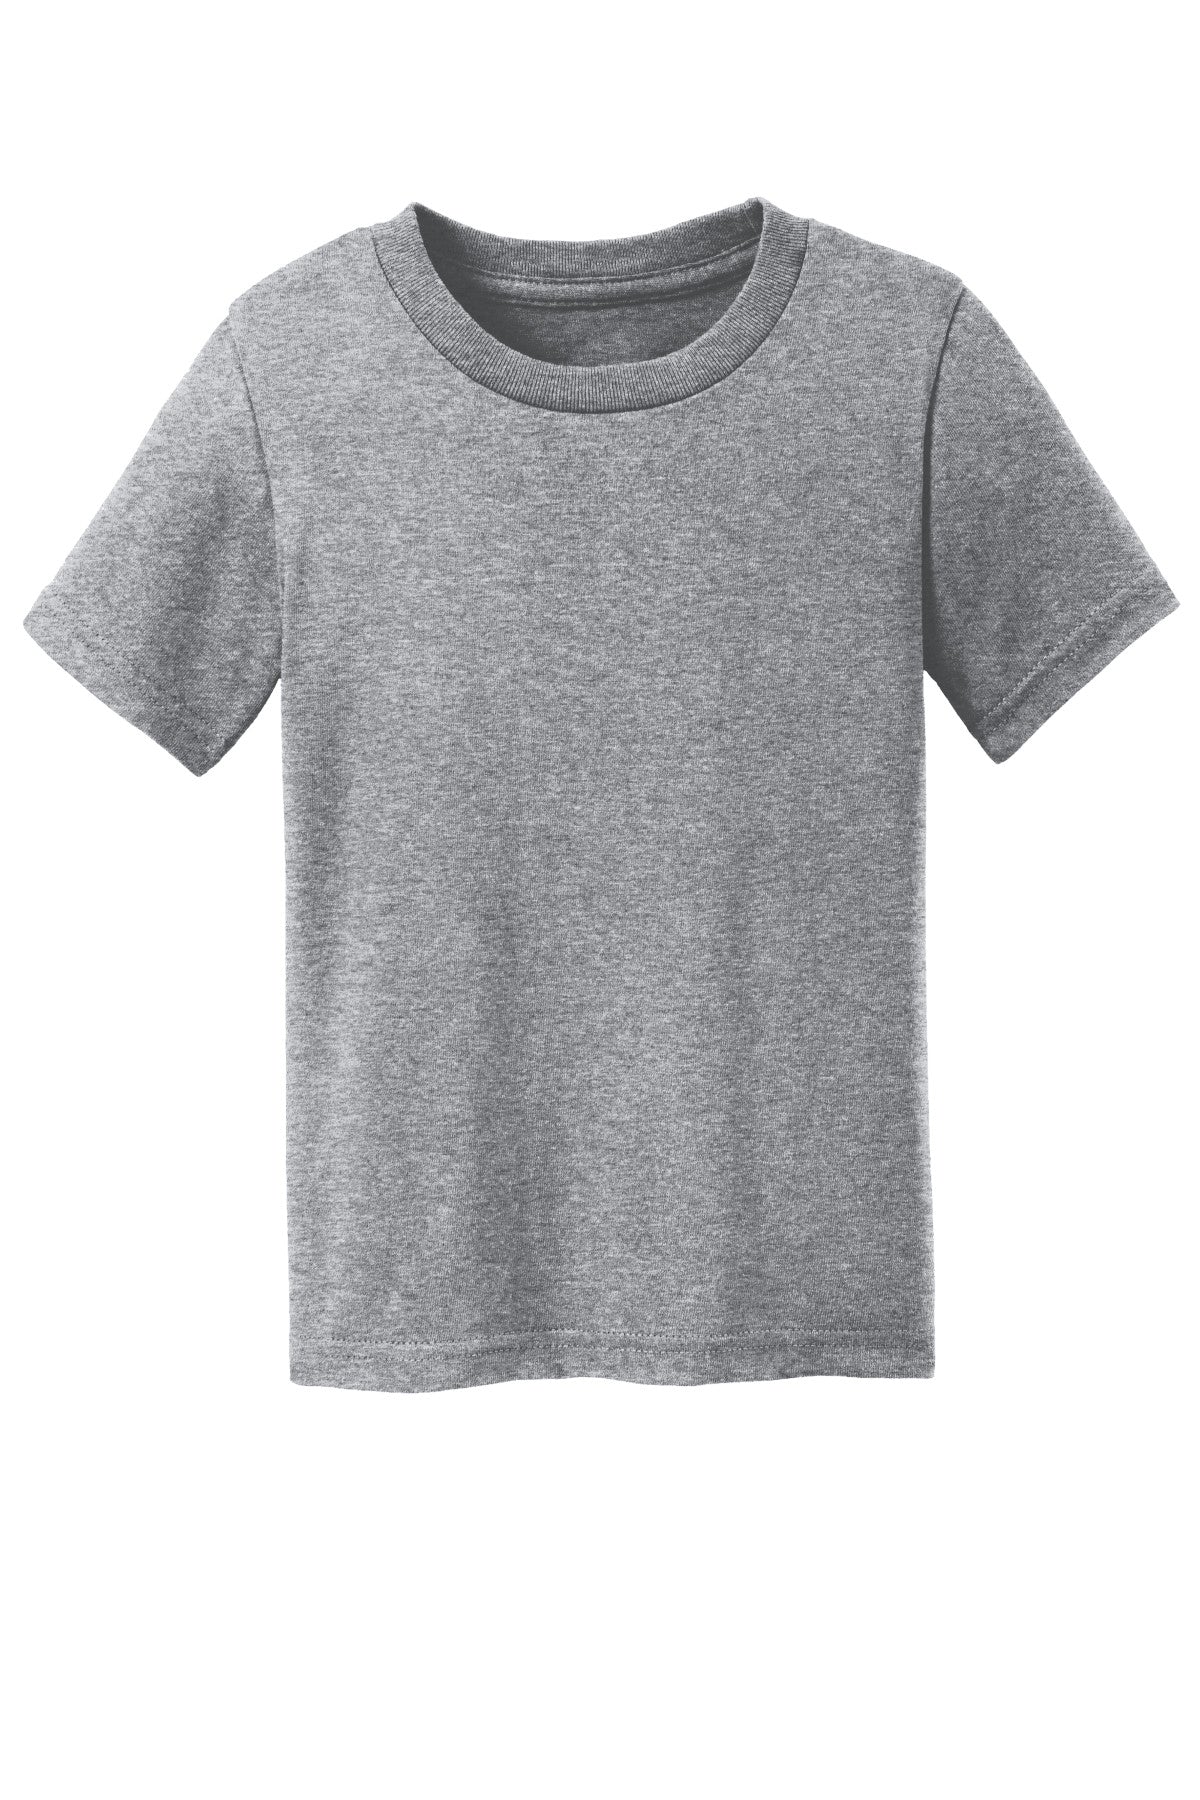 Port & Co Car54T Toddler T-Shirt 2T / Athletic Gray